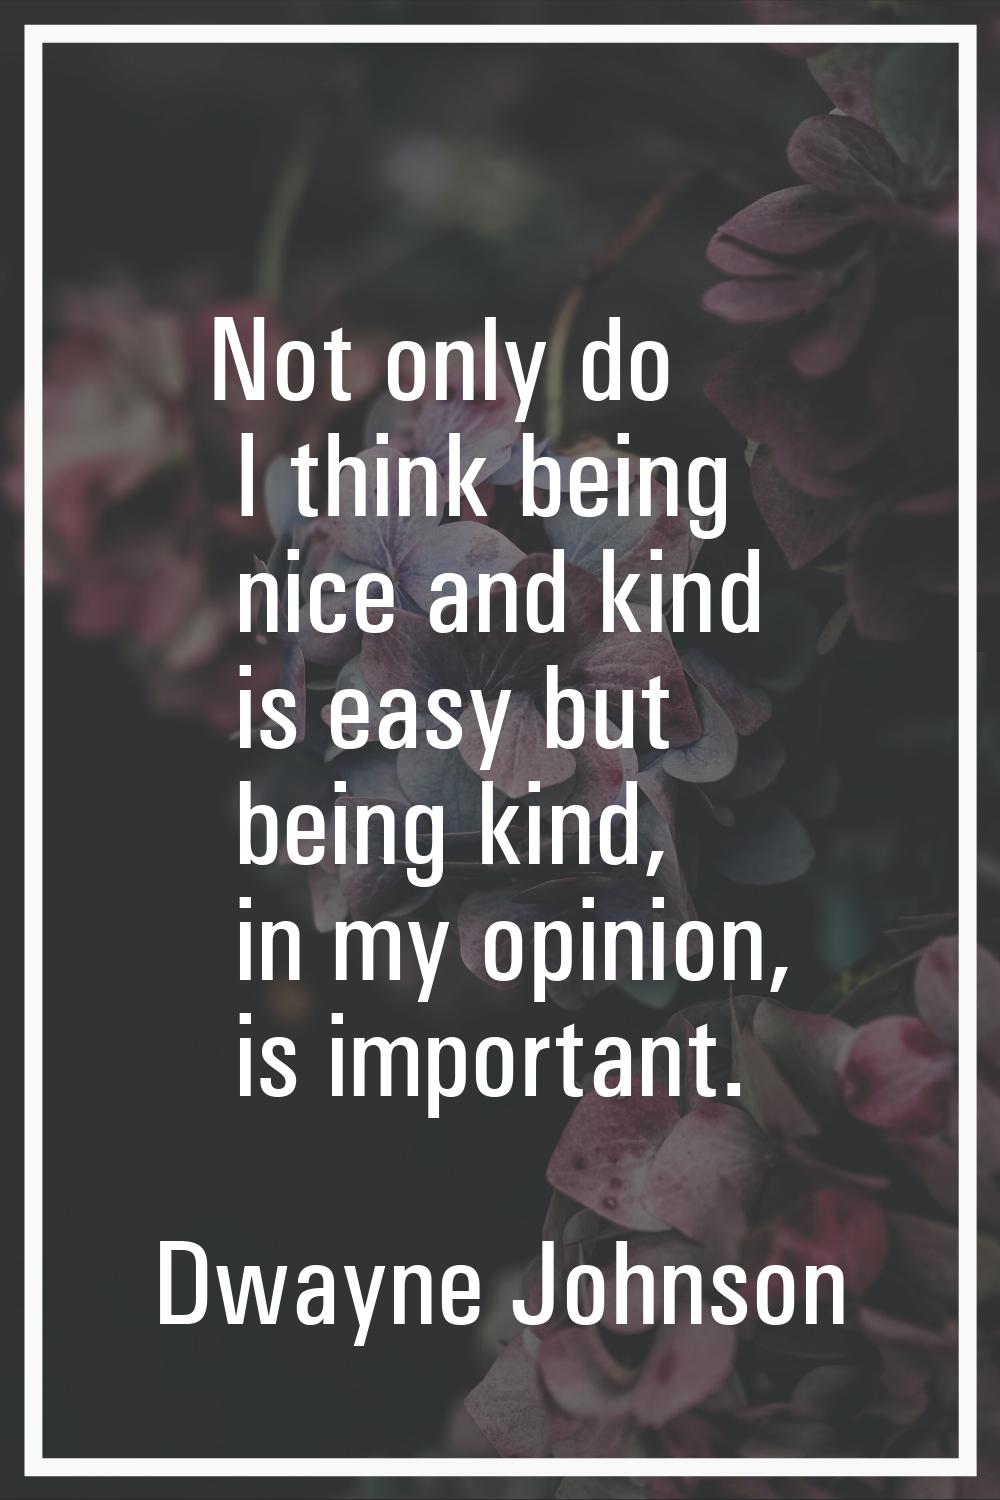 Not only do I think being nice and kind is easy but being kind, in my opinion, is important.